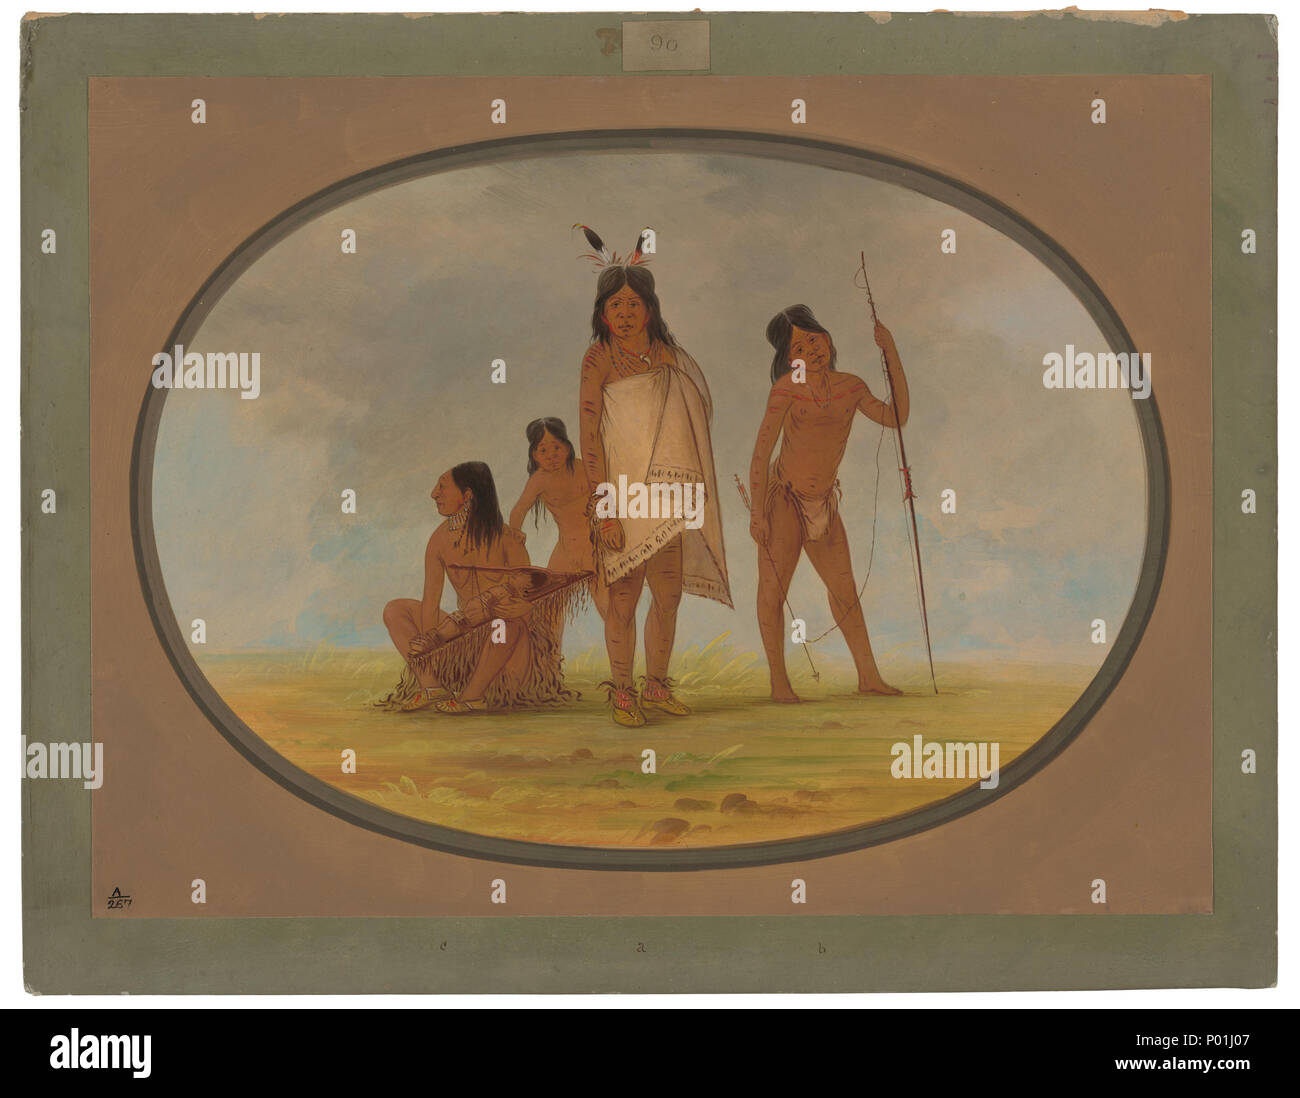 George Catlin (American, 1796 - 1872 ), Four Flathead Indians, 1855/1869, oil on card mounted on paperboard, Paul Mellon Collection 1965.16.150 9 Four Flathead Indians C17019 Stock Photo